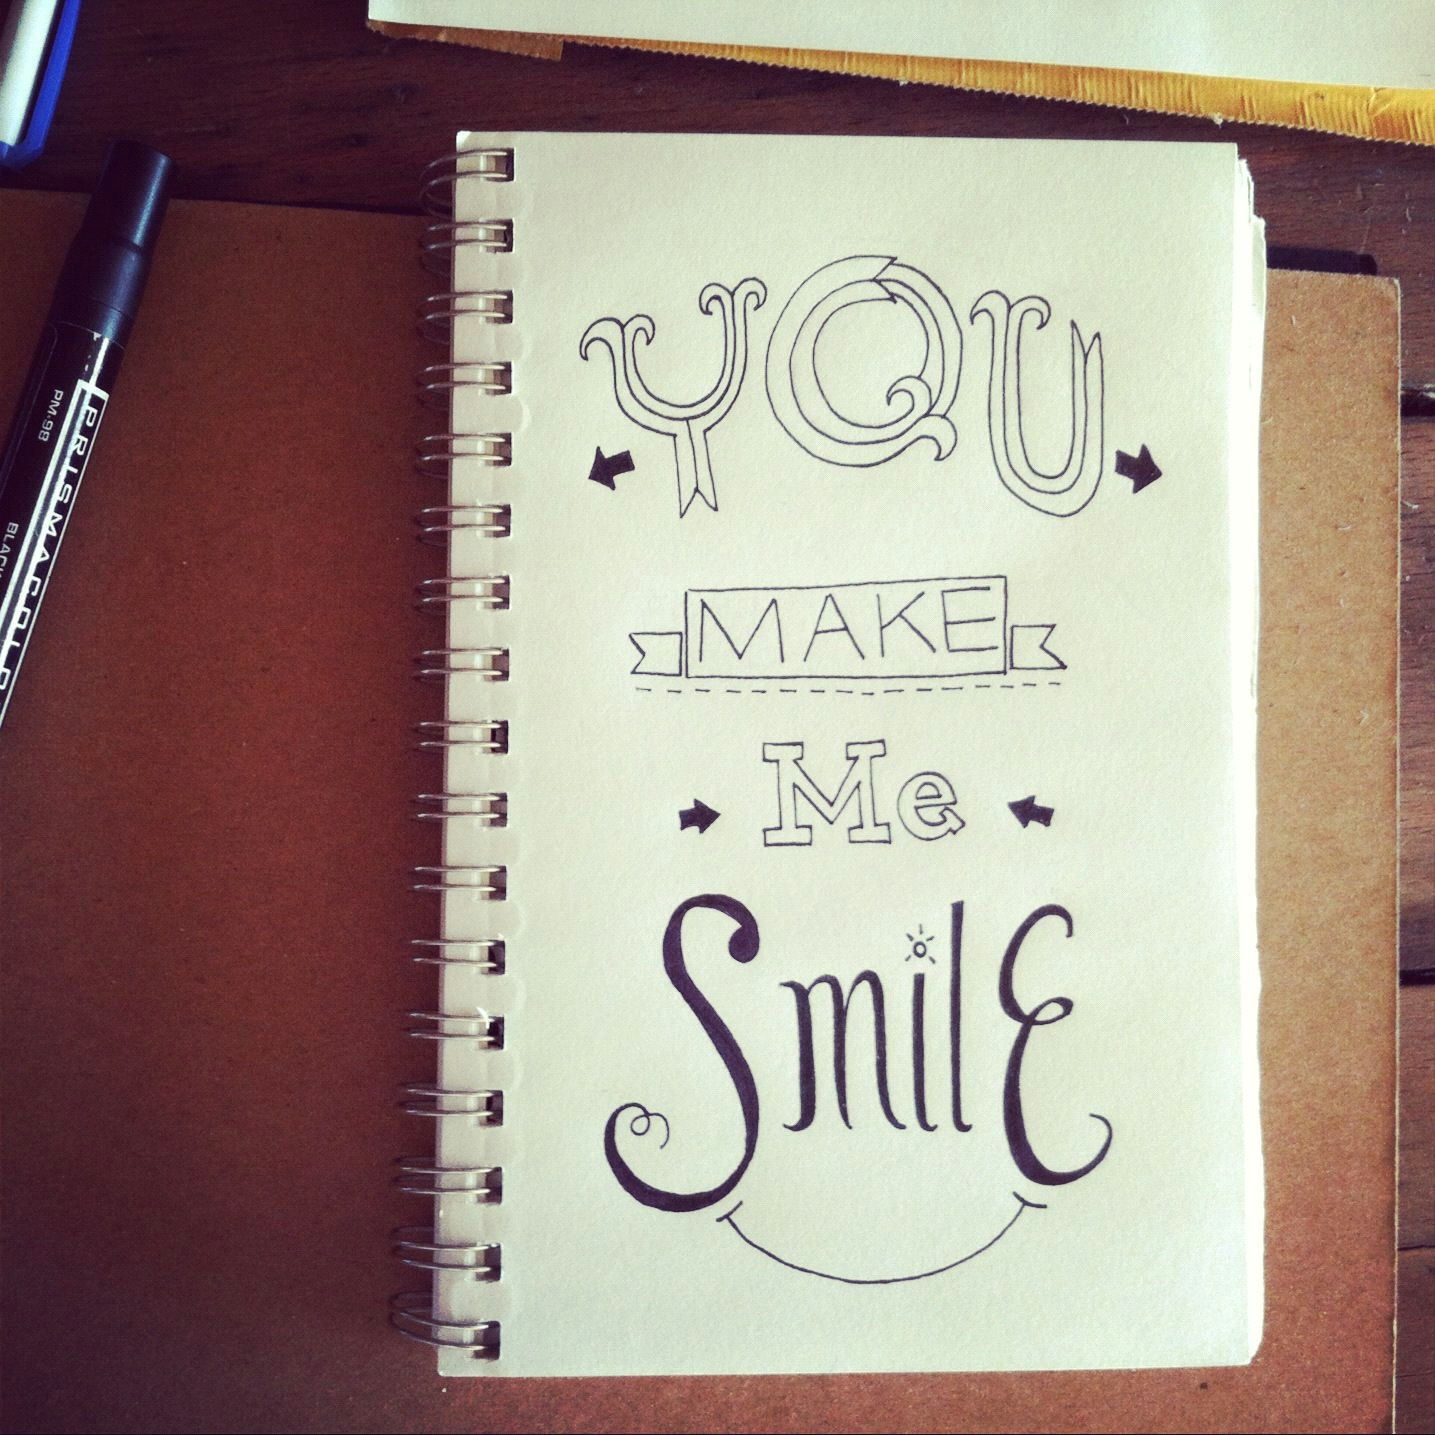 Easy Drawing Quotes You Make Me Smile A Doodle I Did for A Doodle A Day Project On